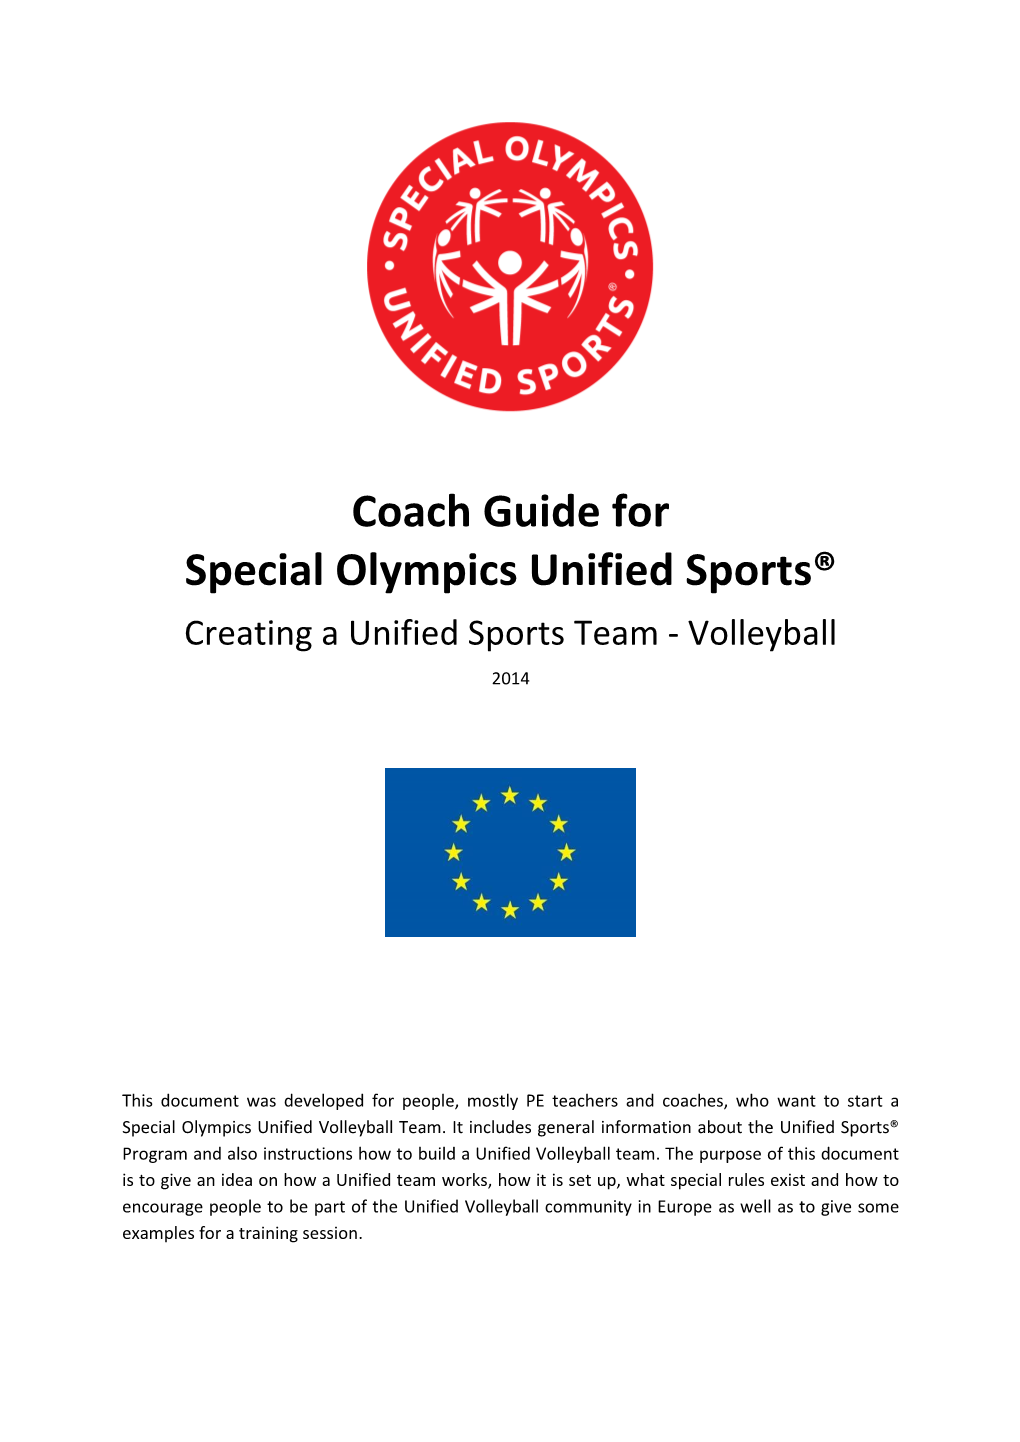 Coach Manual Forspecial Olympics Unified Sports® Volleyball